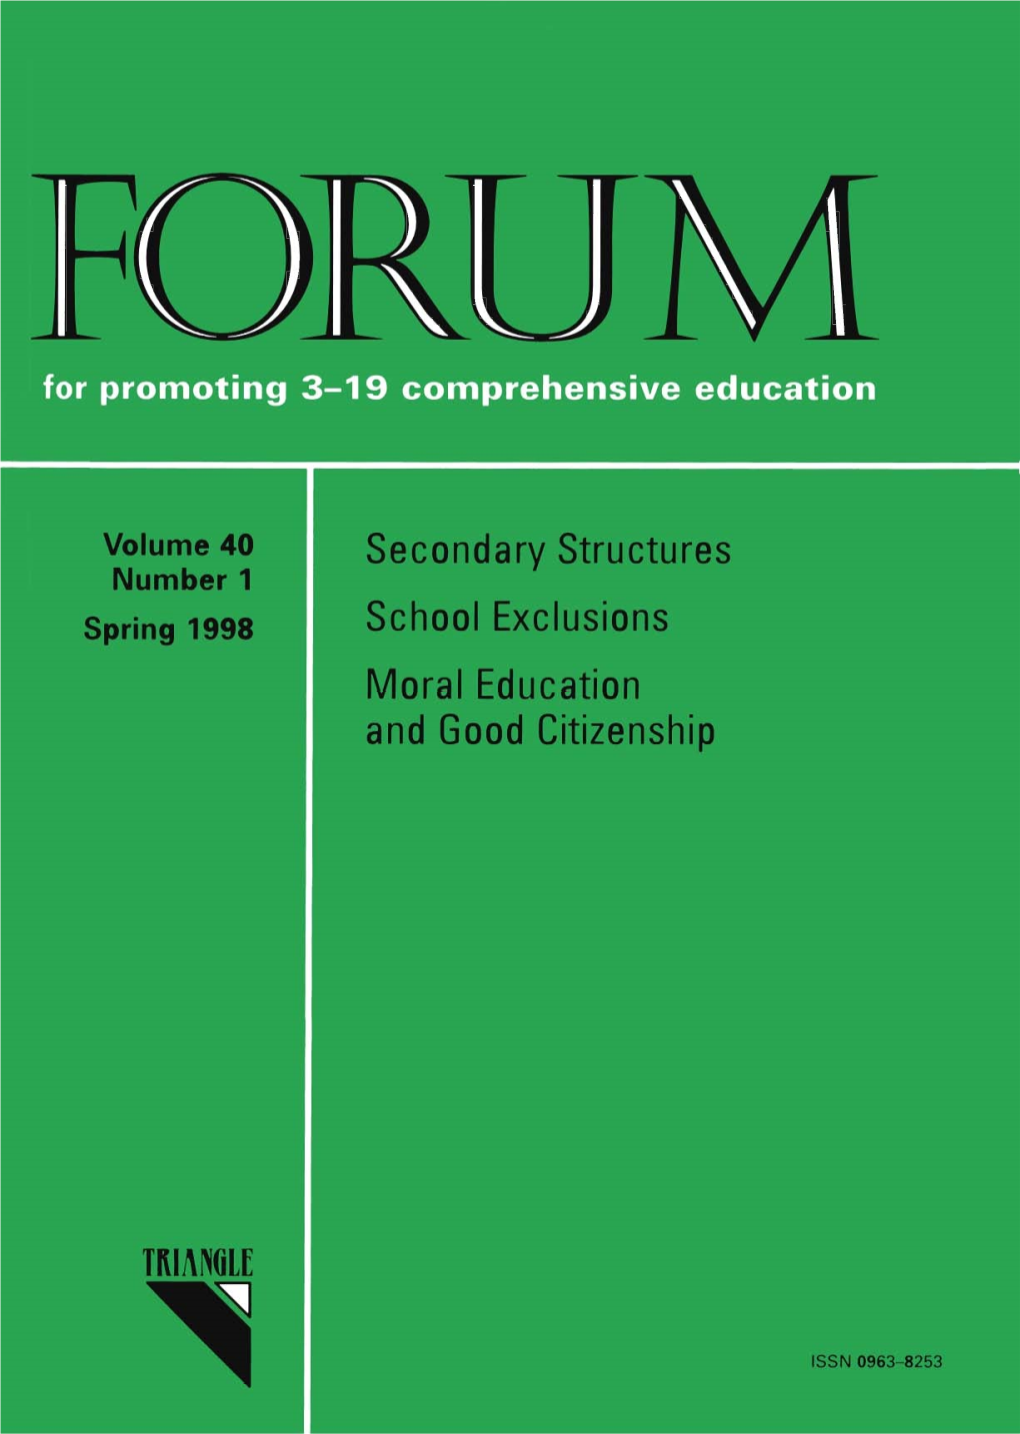 For Promoting 3-19 Comprehensive Education